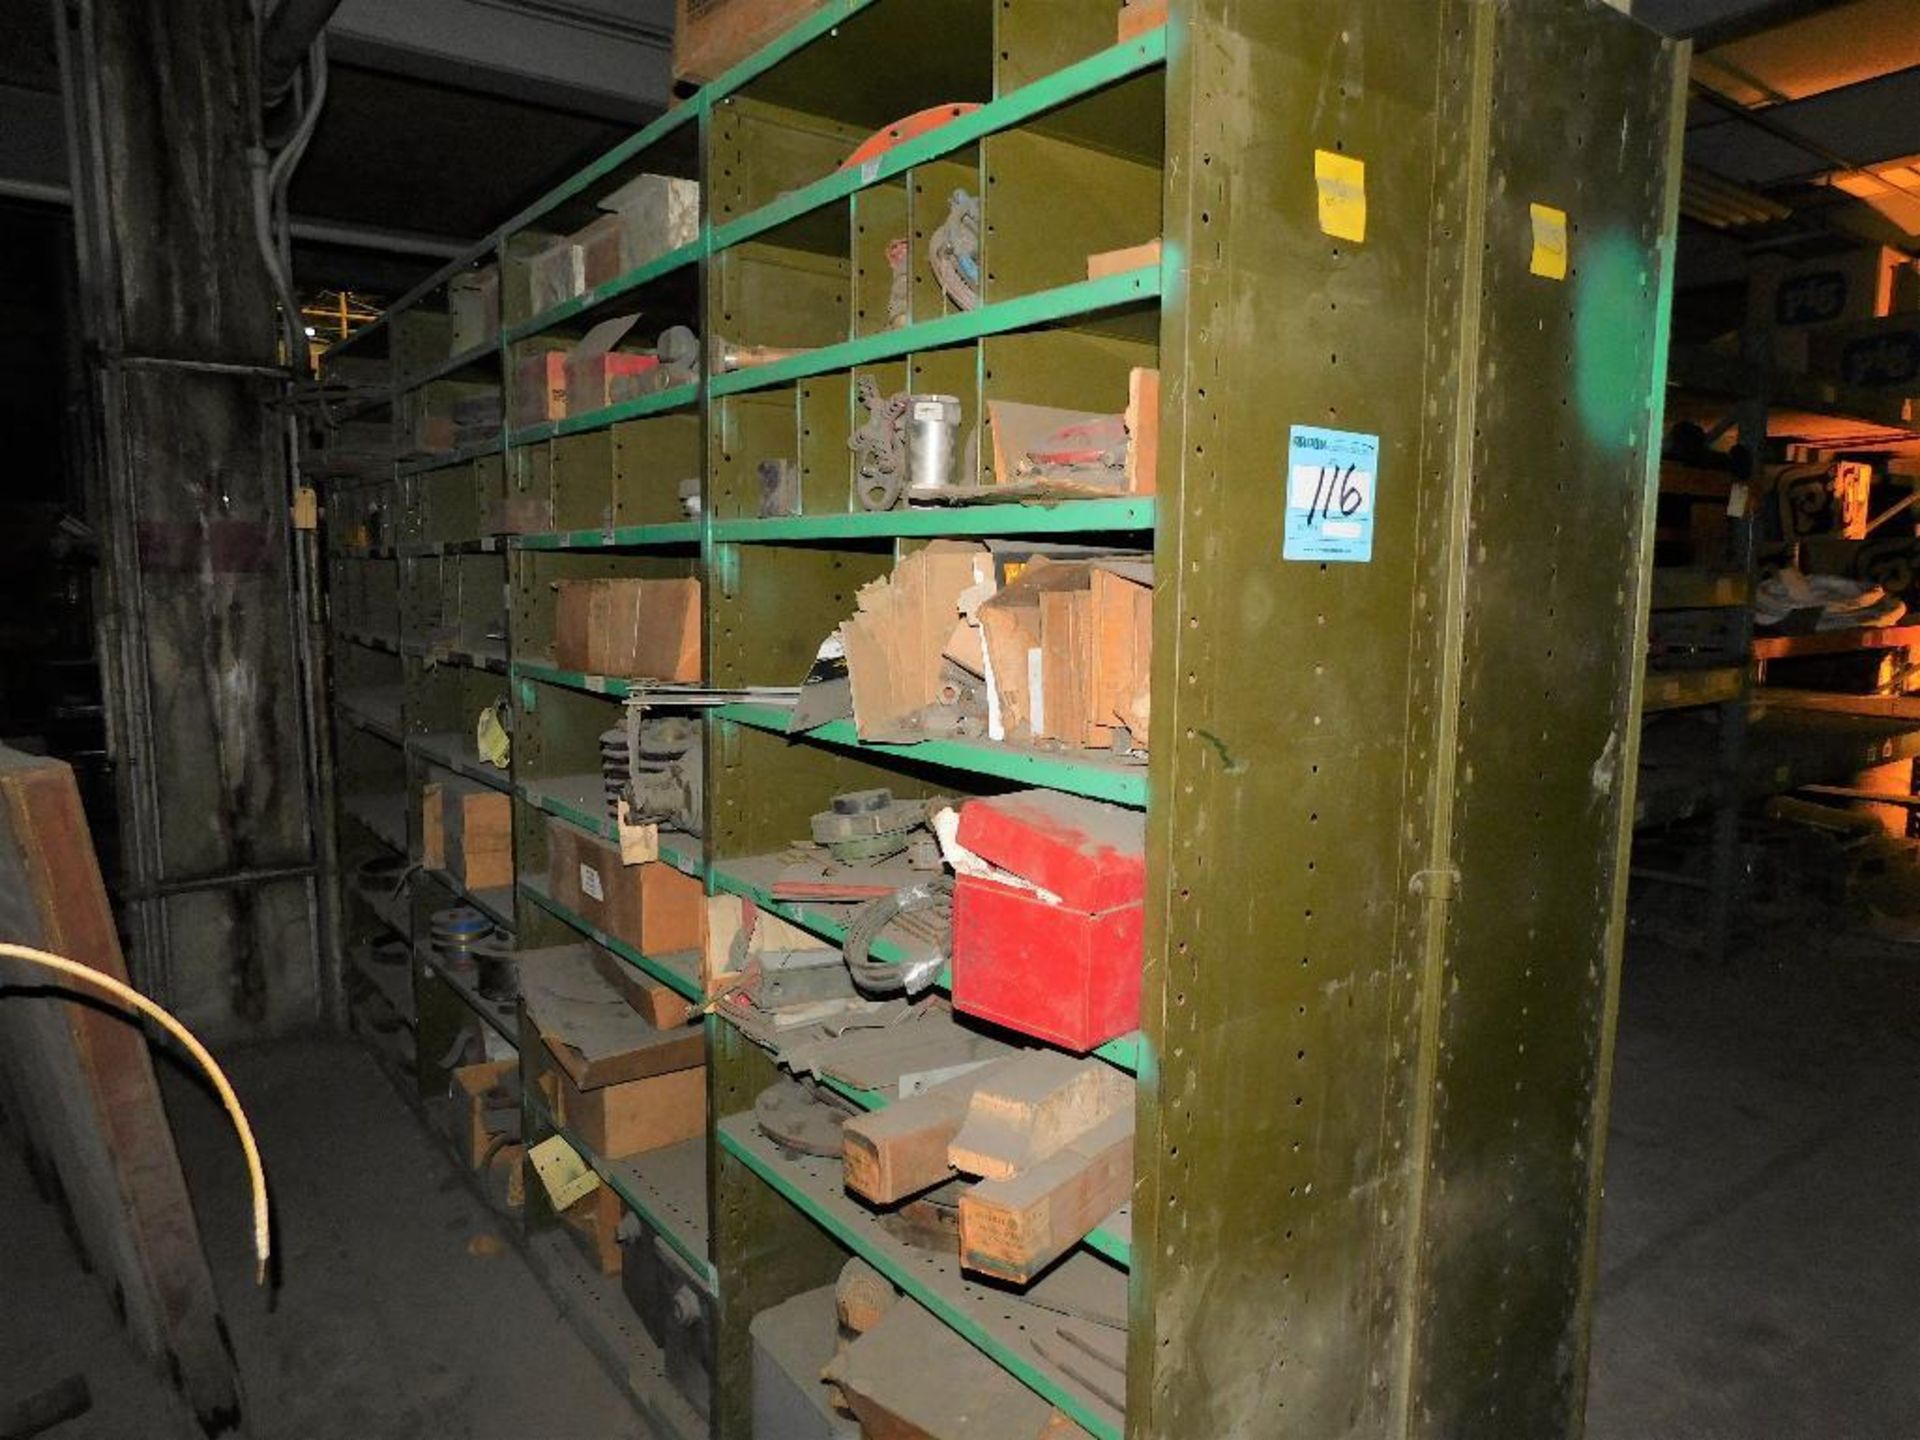 Assorted Steel Shelving Units with Electrical Parts, Extention Cord, Compressor Ports.